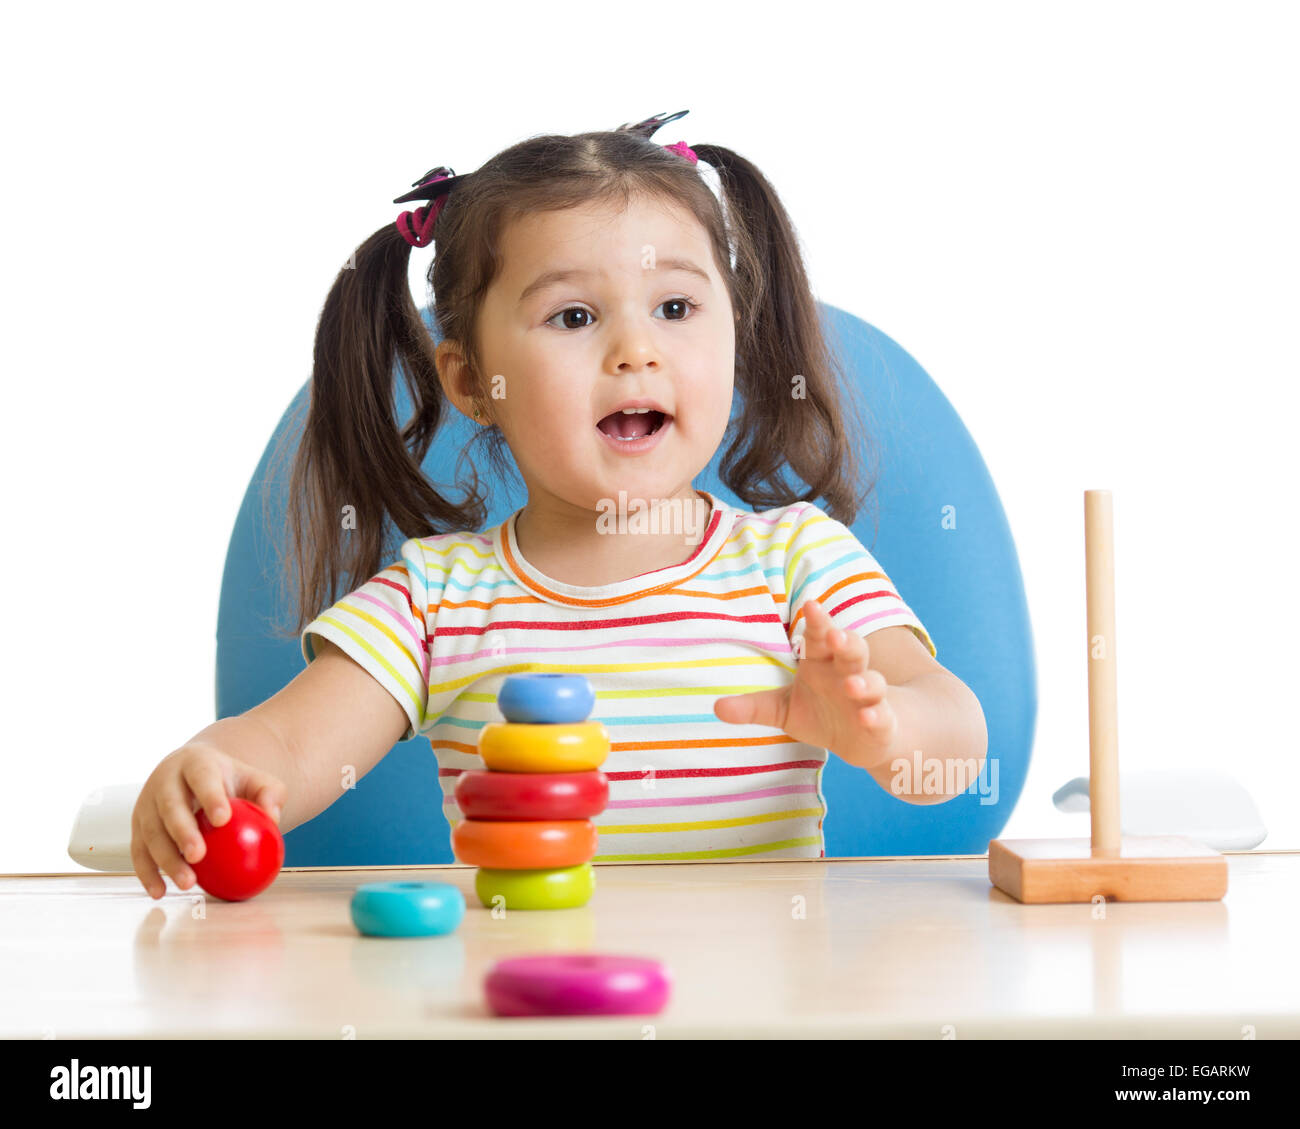 child playing with color pyramid toy Stock Photo - Alamy